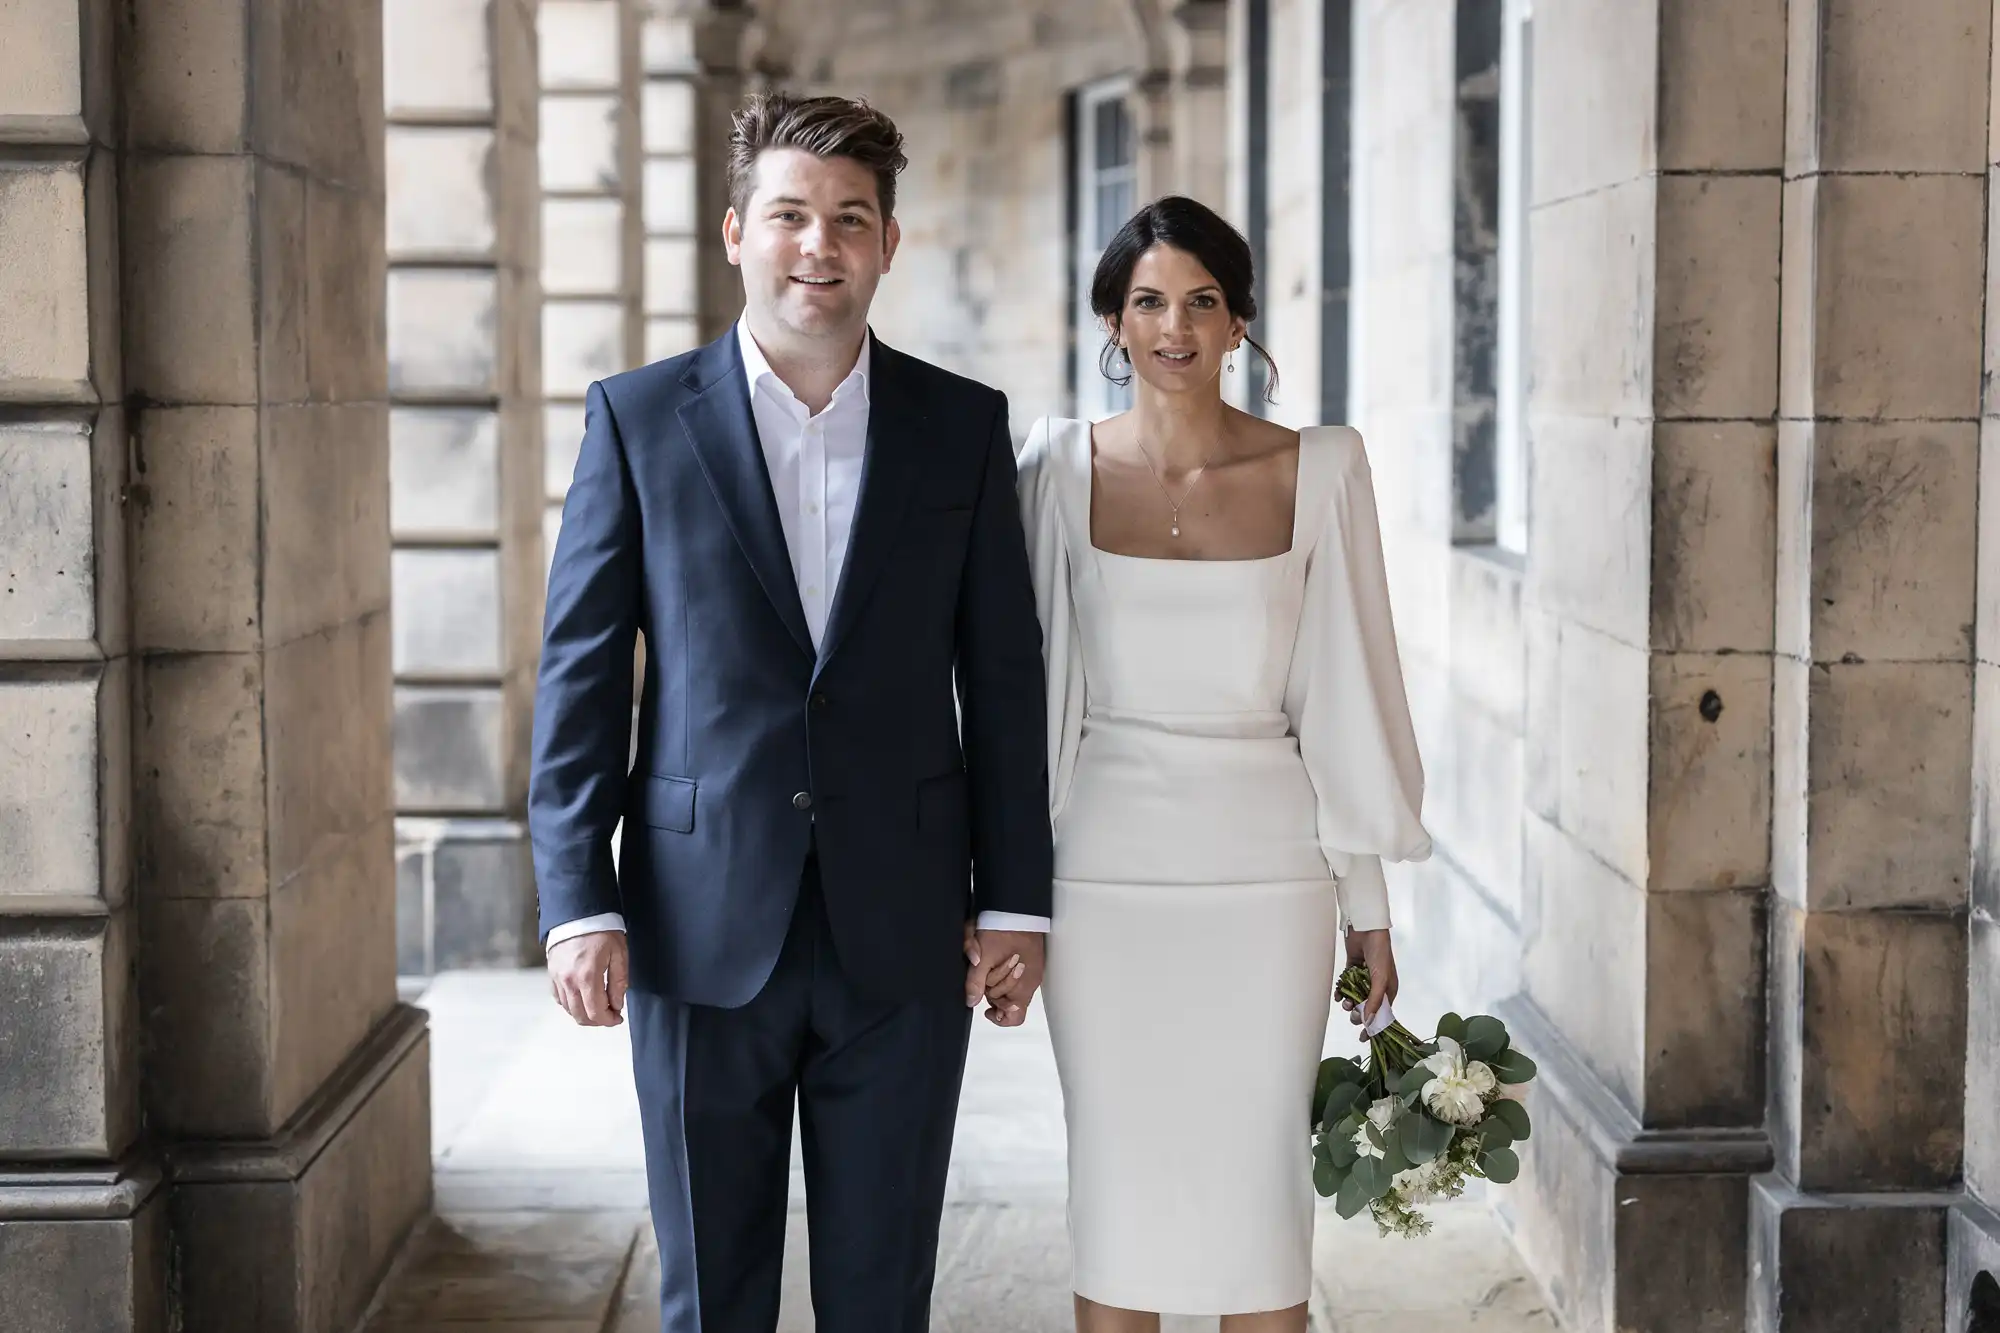 A newlywed couple walking hand in hand through a stone-pillared corridor, the bride in a white dress and carrying a bouquet, and the groom in a navy suit.